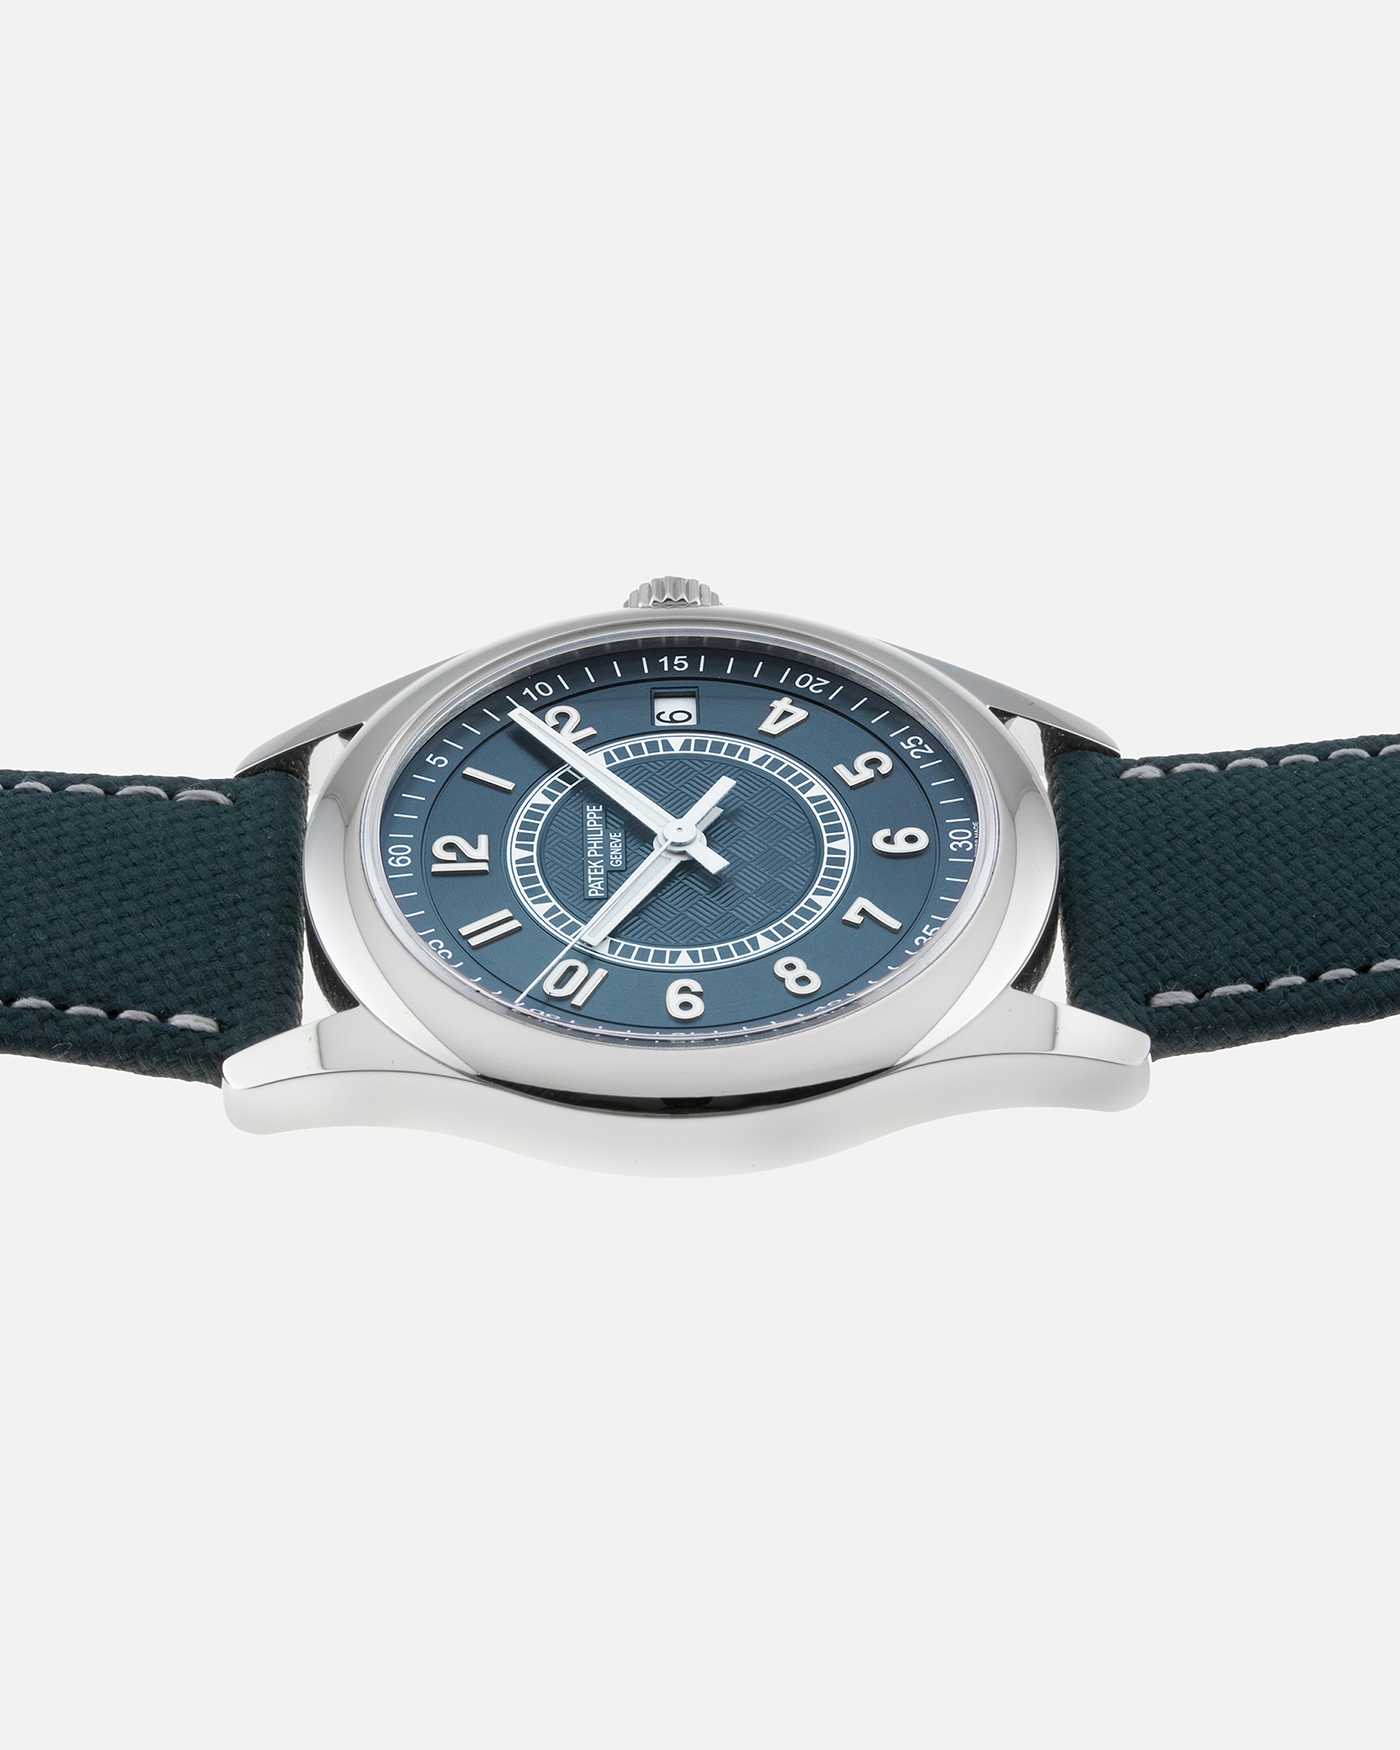 Brand: Patek Philippe Year: 2019 Model: Ref. 6007A Calatrava Limited Edition Material: Stainless Steel Movement: Cal. 324 SC (Seconde Central), Self–Winding Case Diameter: 40mm Bracelet/Strap: Patek Philippe Grey-Blue Calfskin Leather Strap with Embossed Fabric Pattern, and Signed Tang Buckle